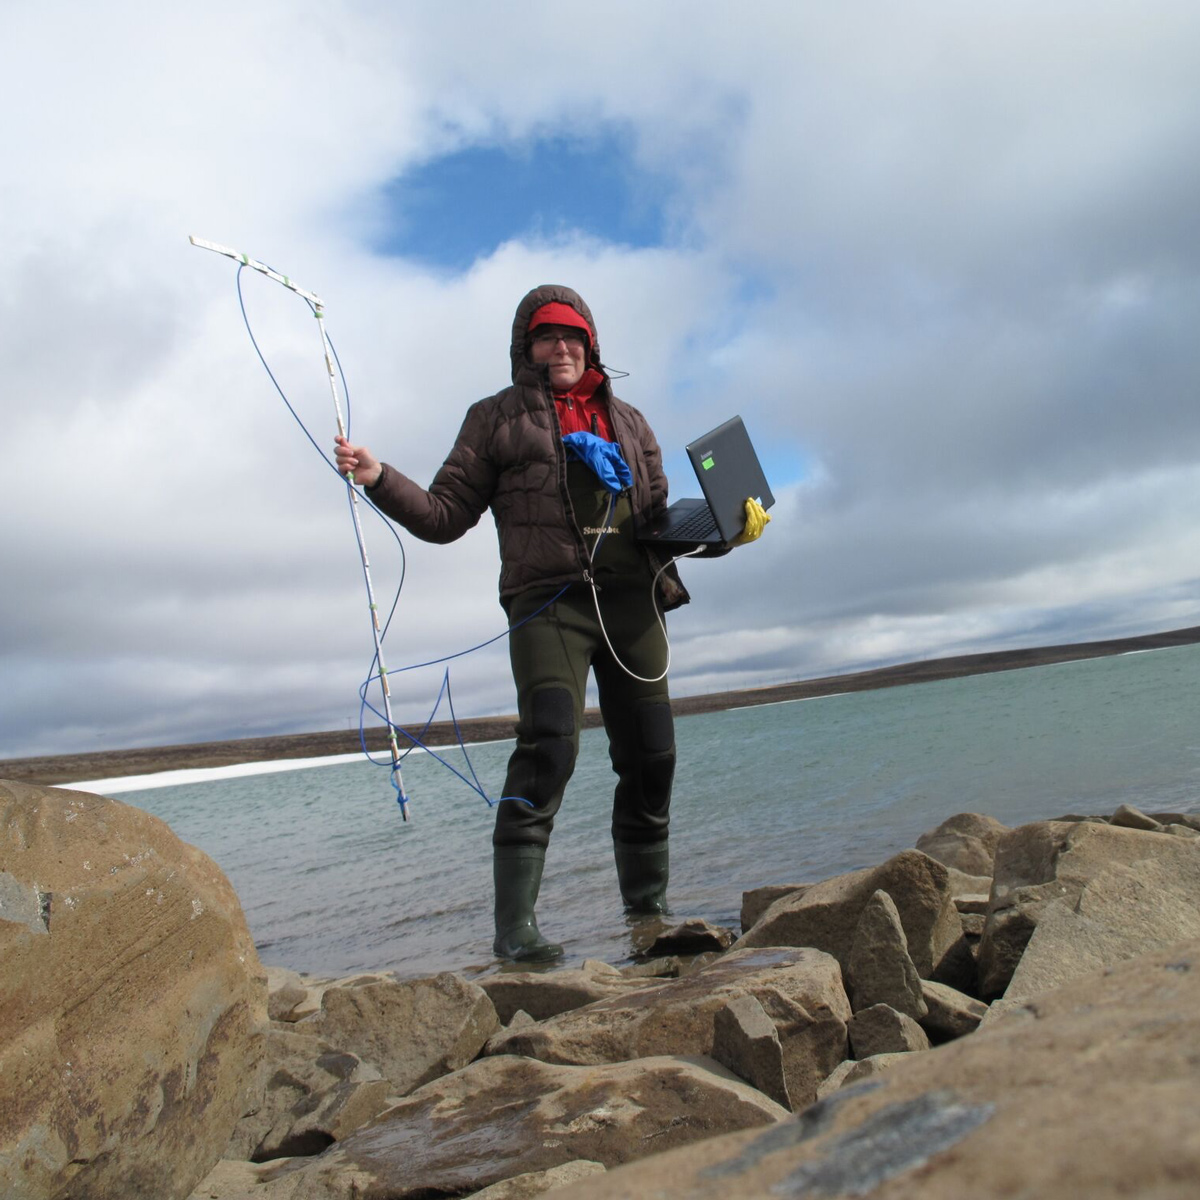 Primary Investigator Jenny Boughman preparing to record data on Ãžristikla, a glacial lake in the northern highlands. Copyright: Jenny Boughman